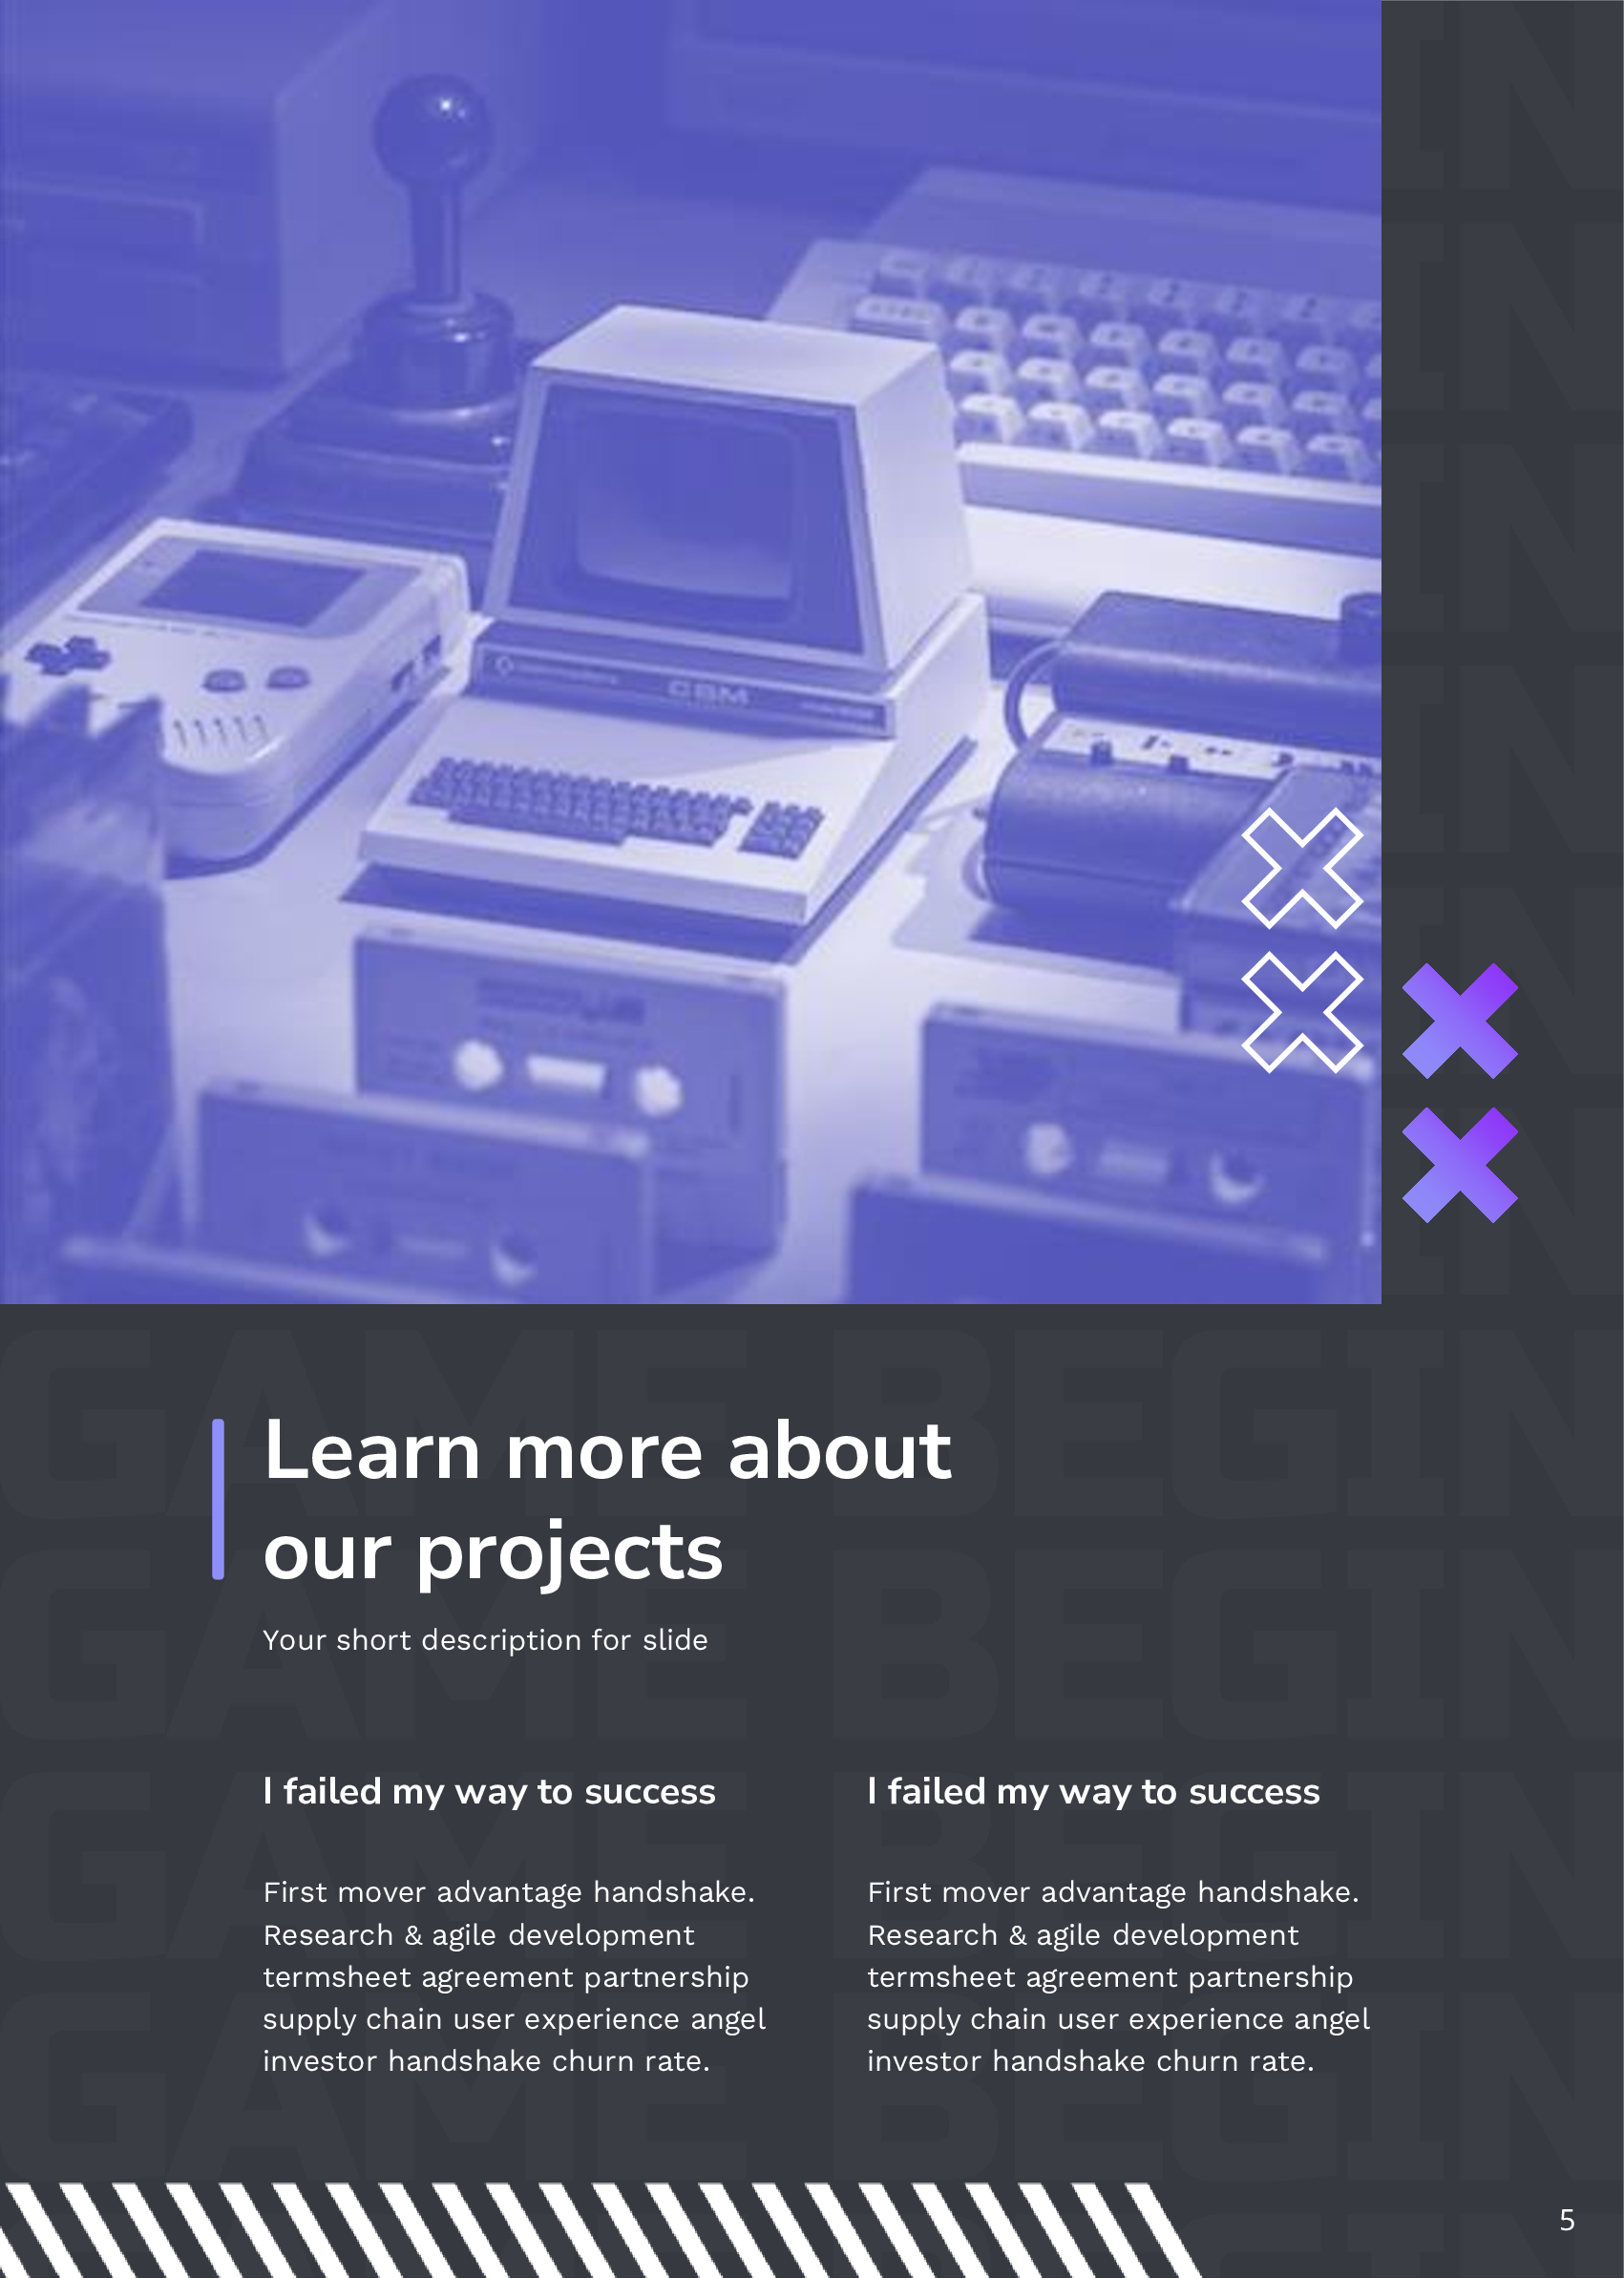 Learn more about projects.